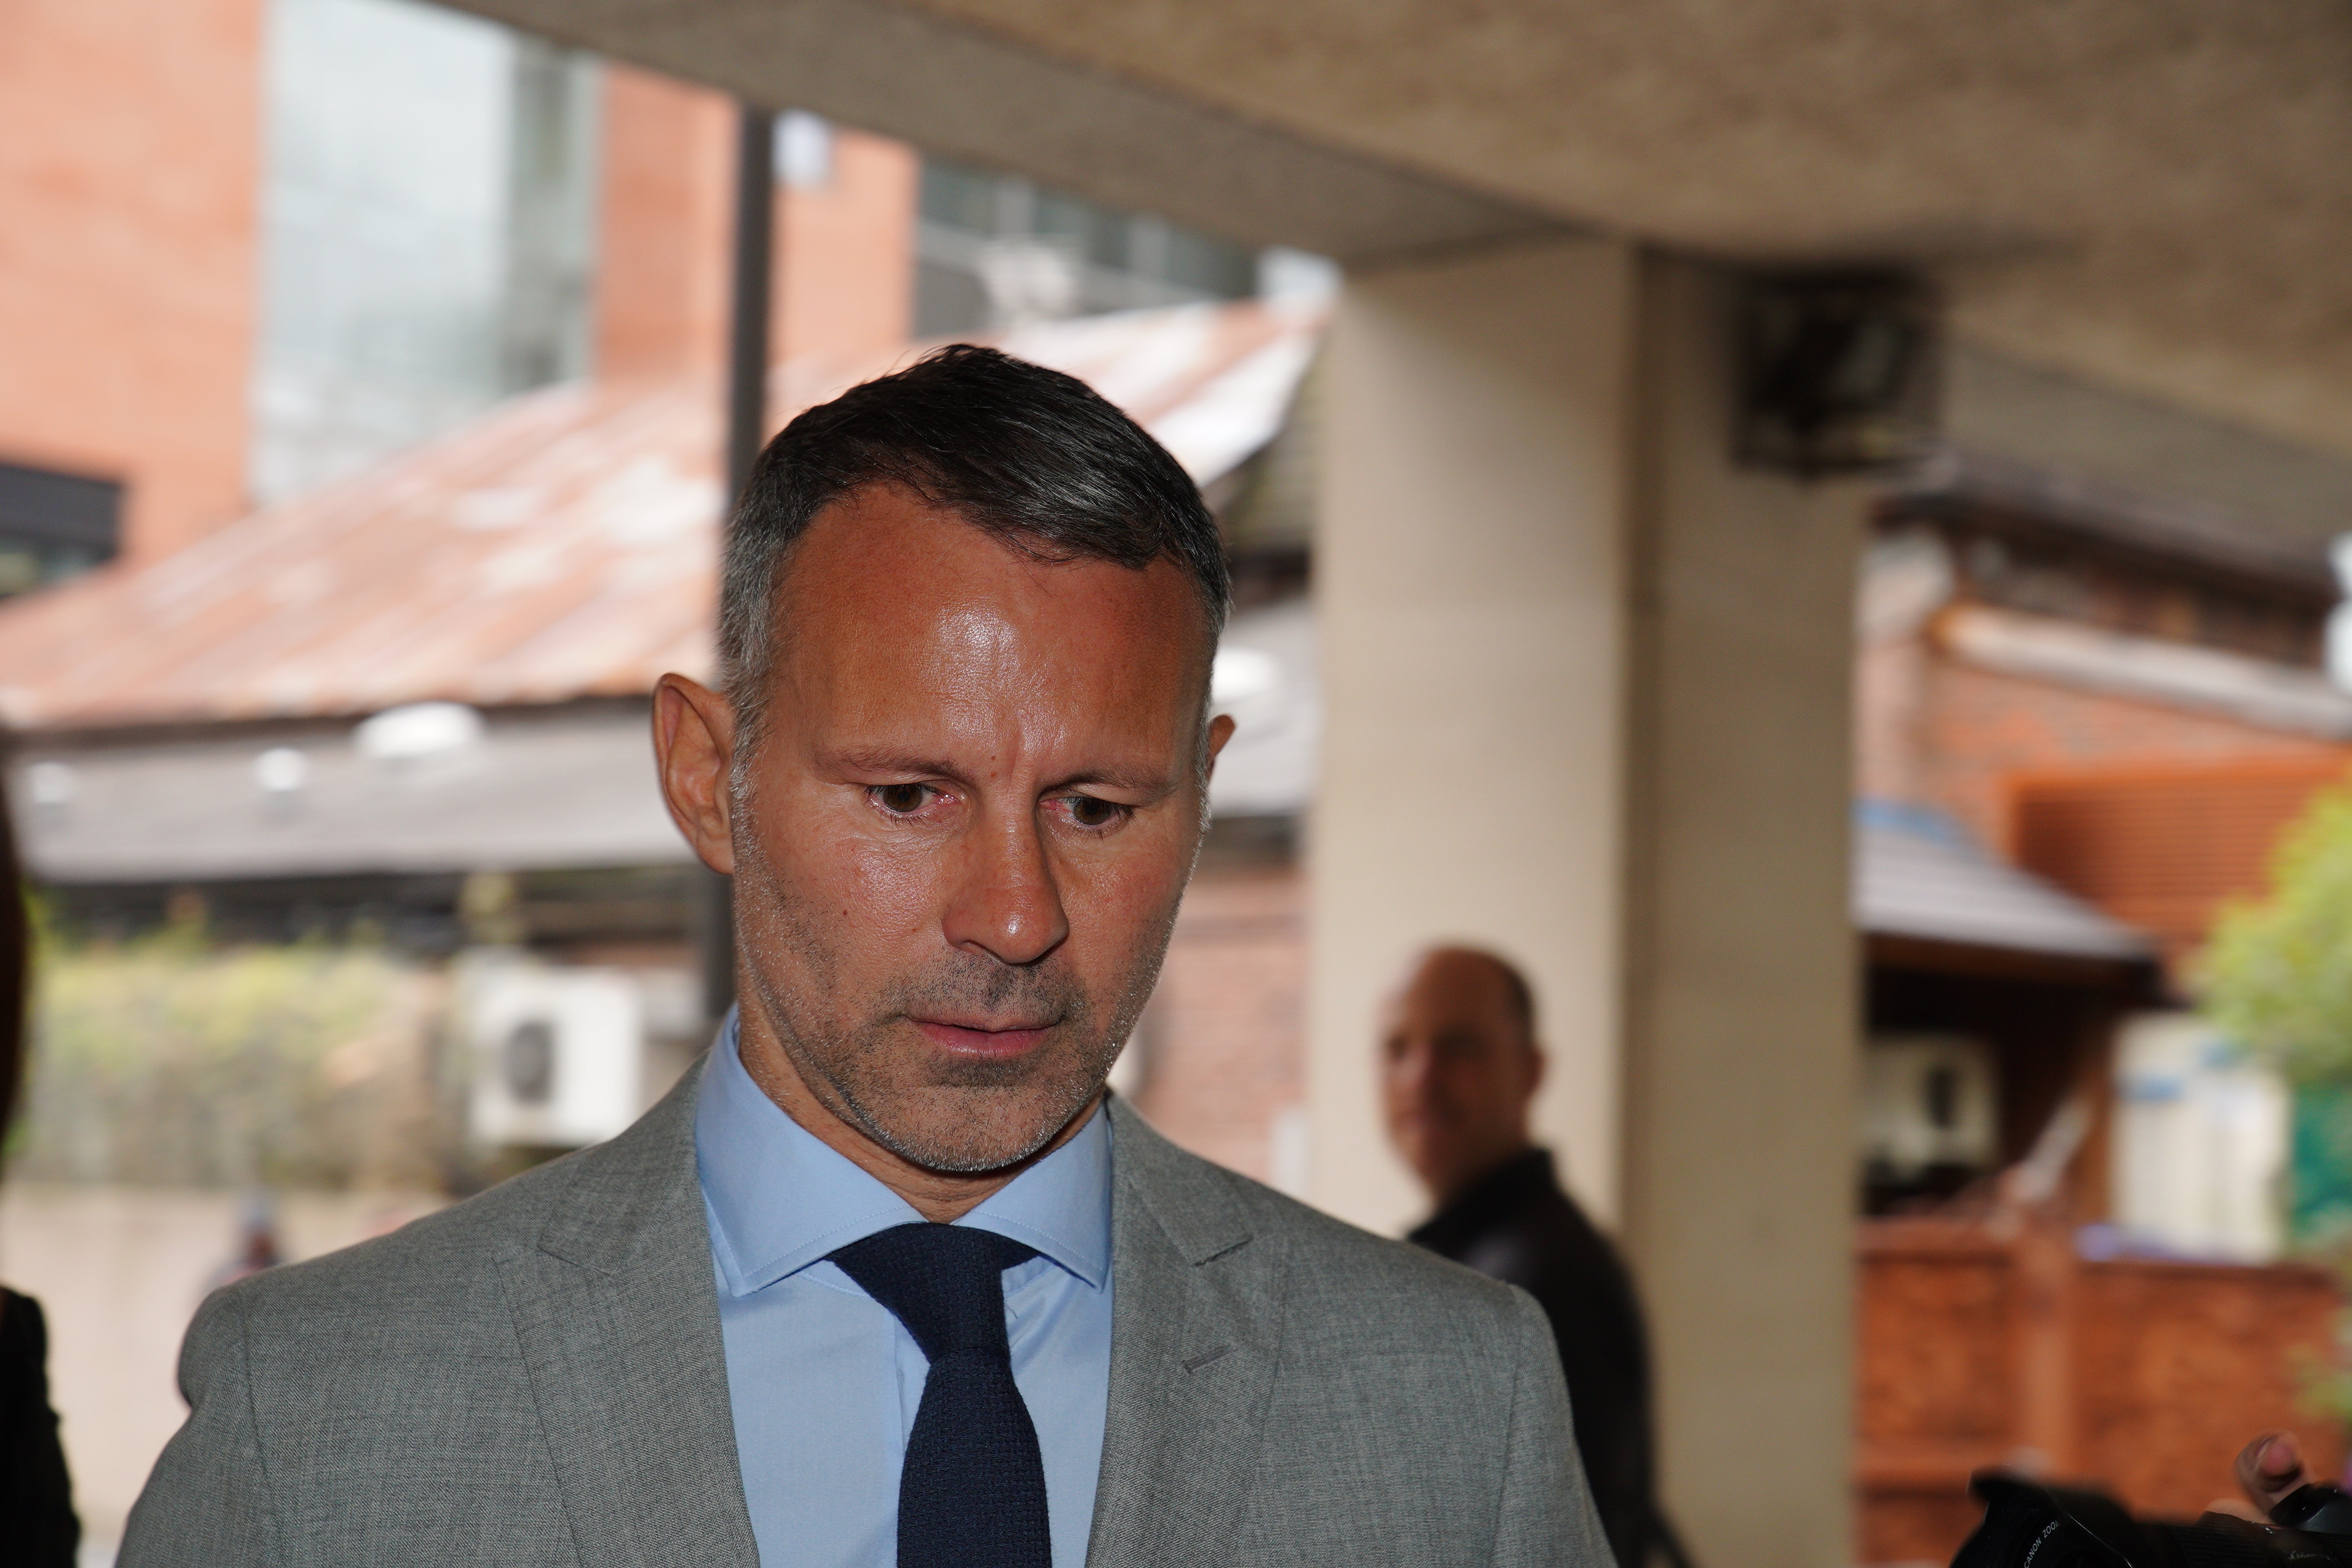 Giggs enjoyed rough sex life with ex who accuses him of assault, jury told The Independent picture photo